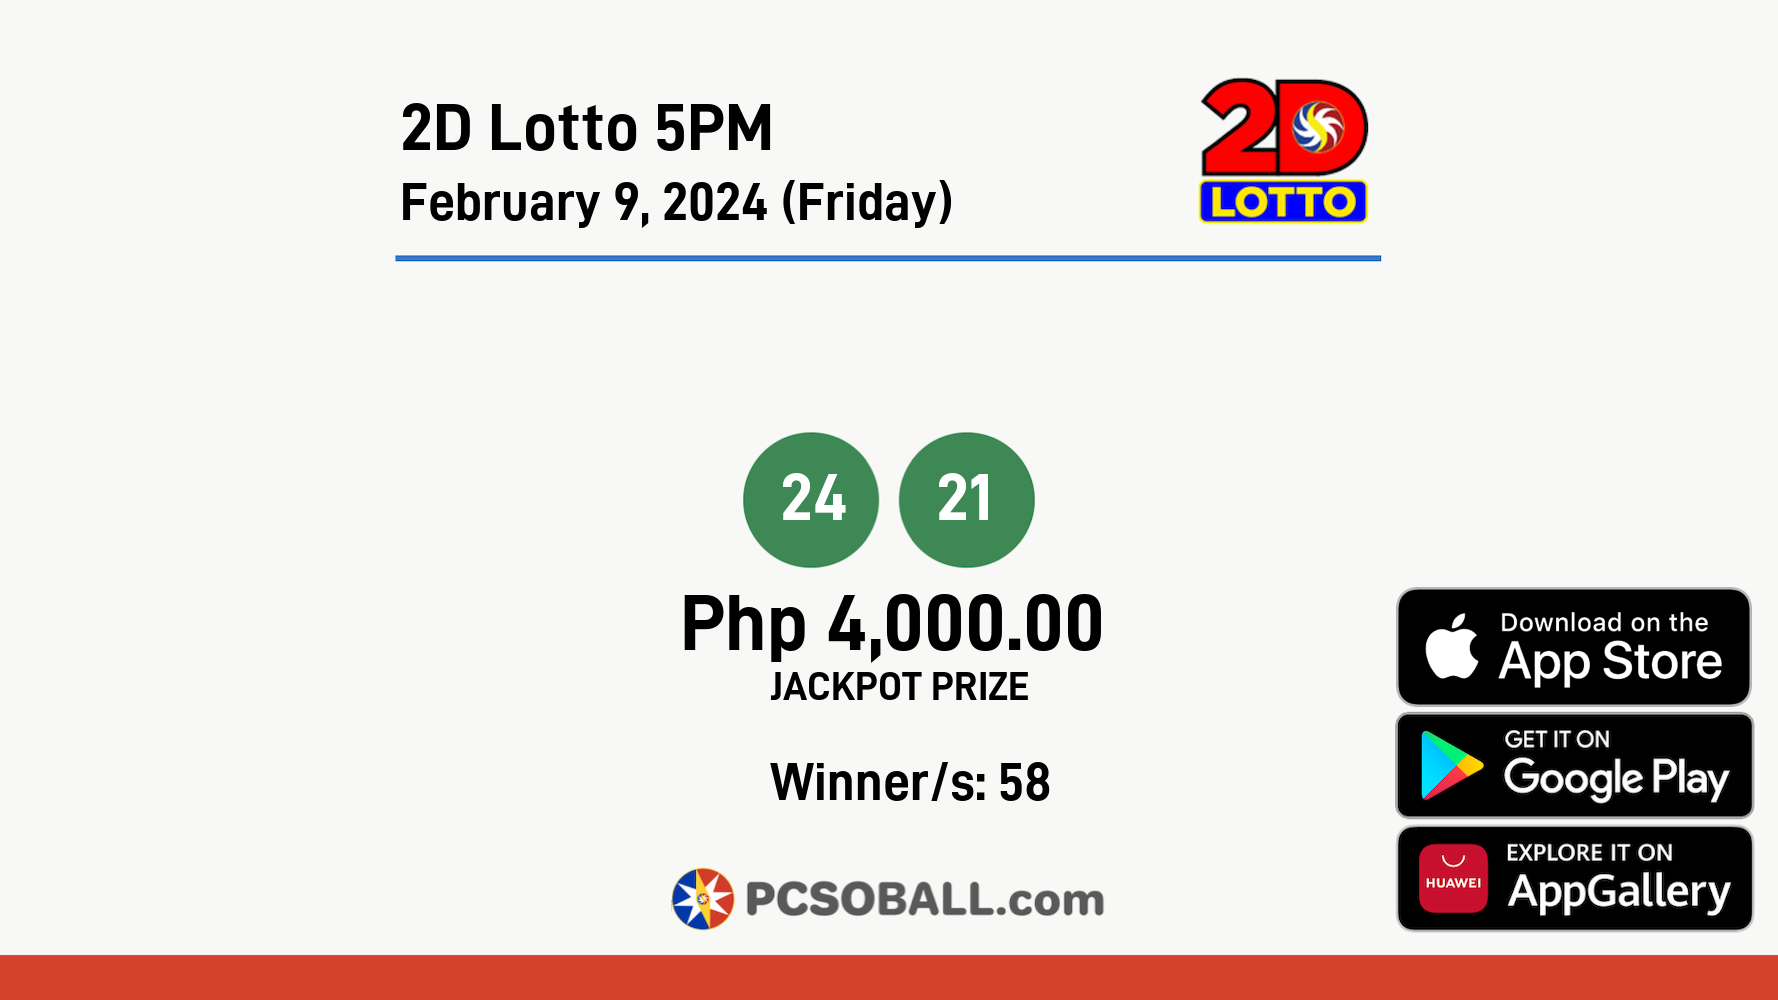 2D Lotto 5PM February 9, 2024 (Friday) Result